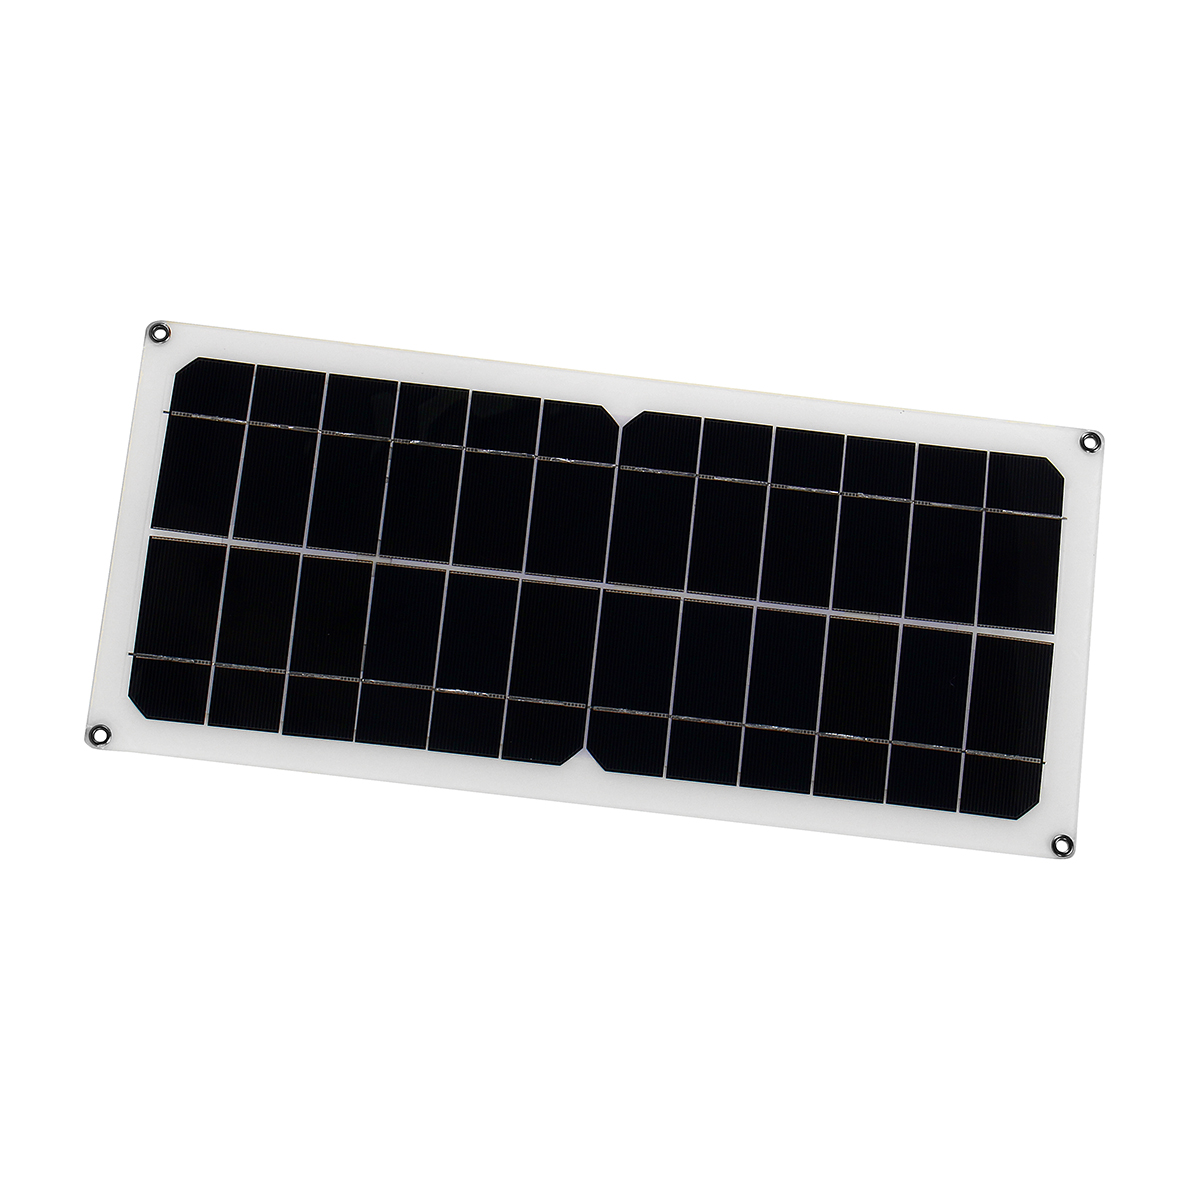 SP-10W 420*190*2.5mm Flexible Monocrystalline Solar Panel with Rear Junction Box/USB Cable 11